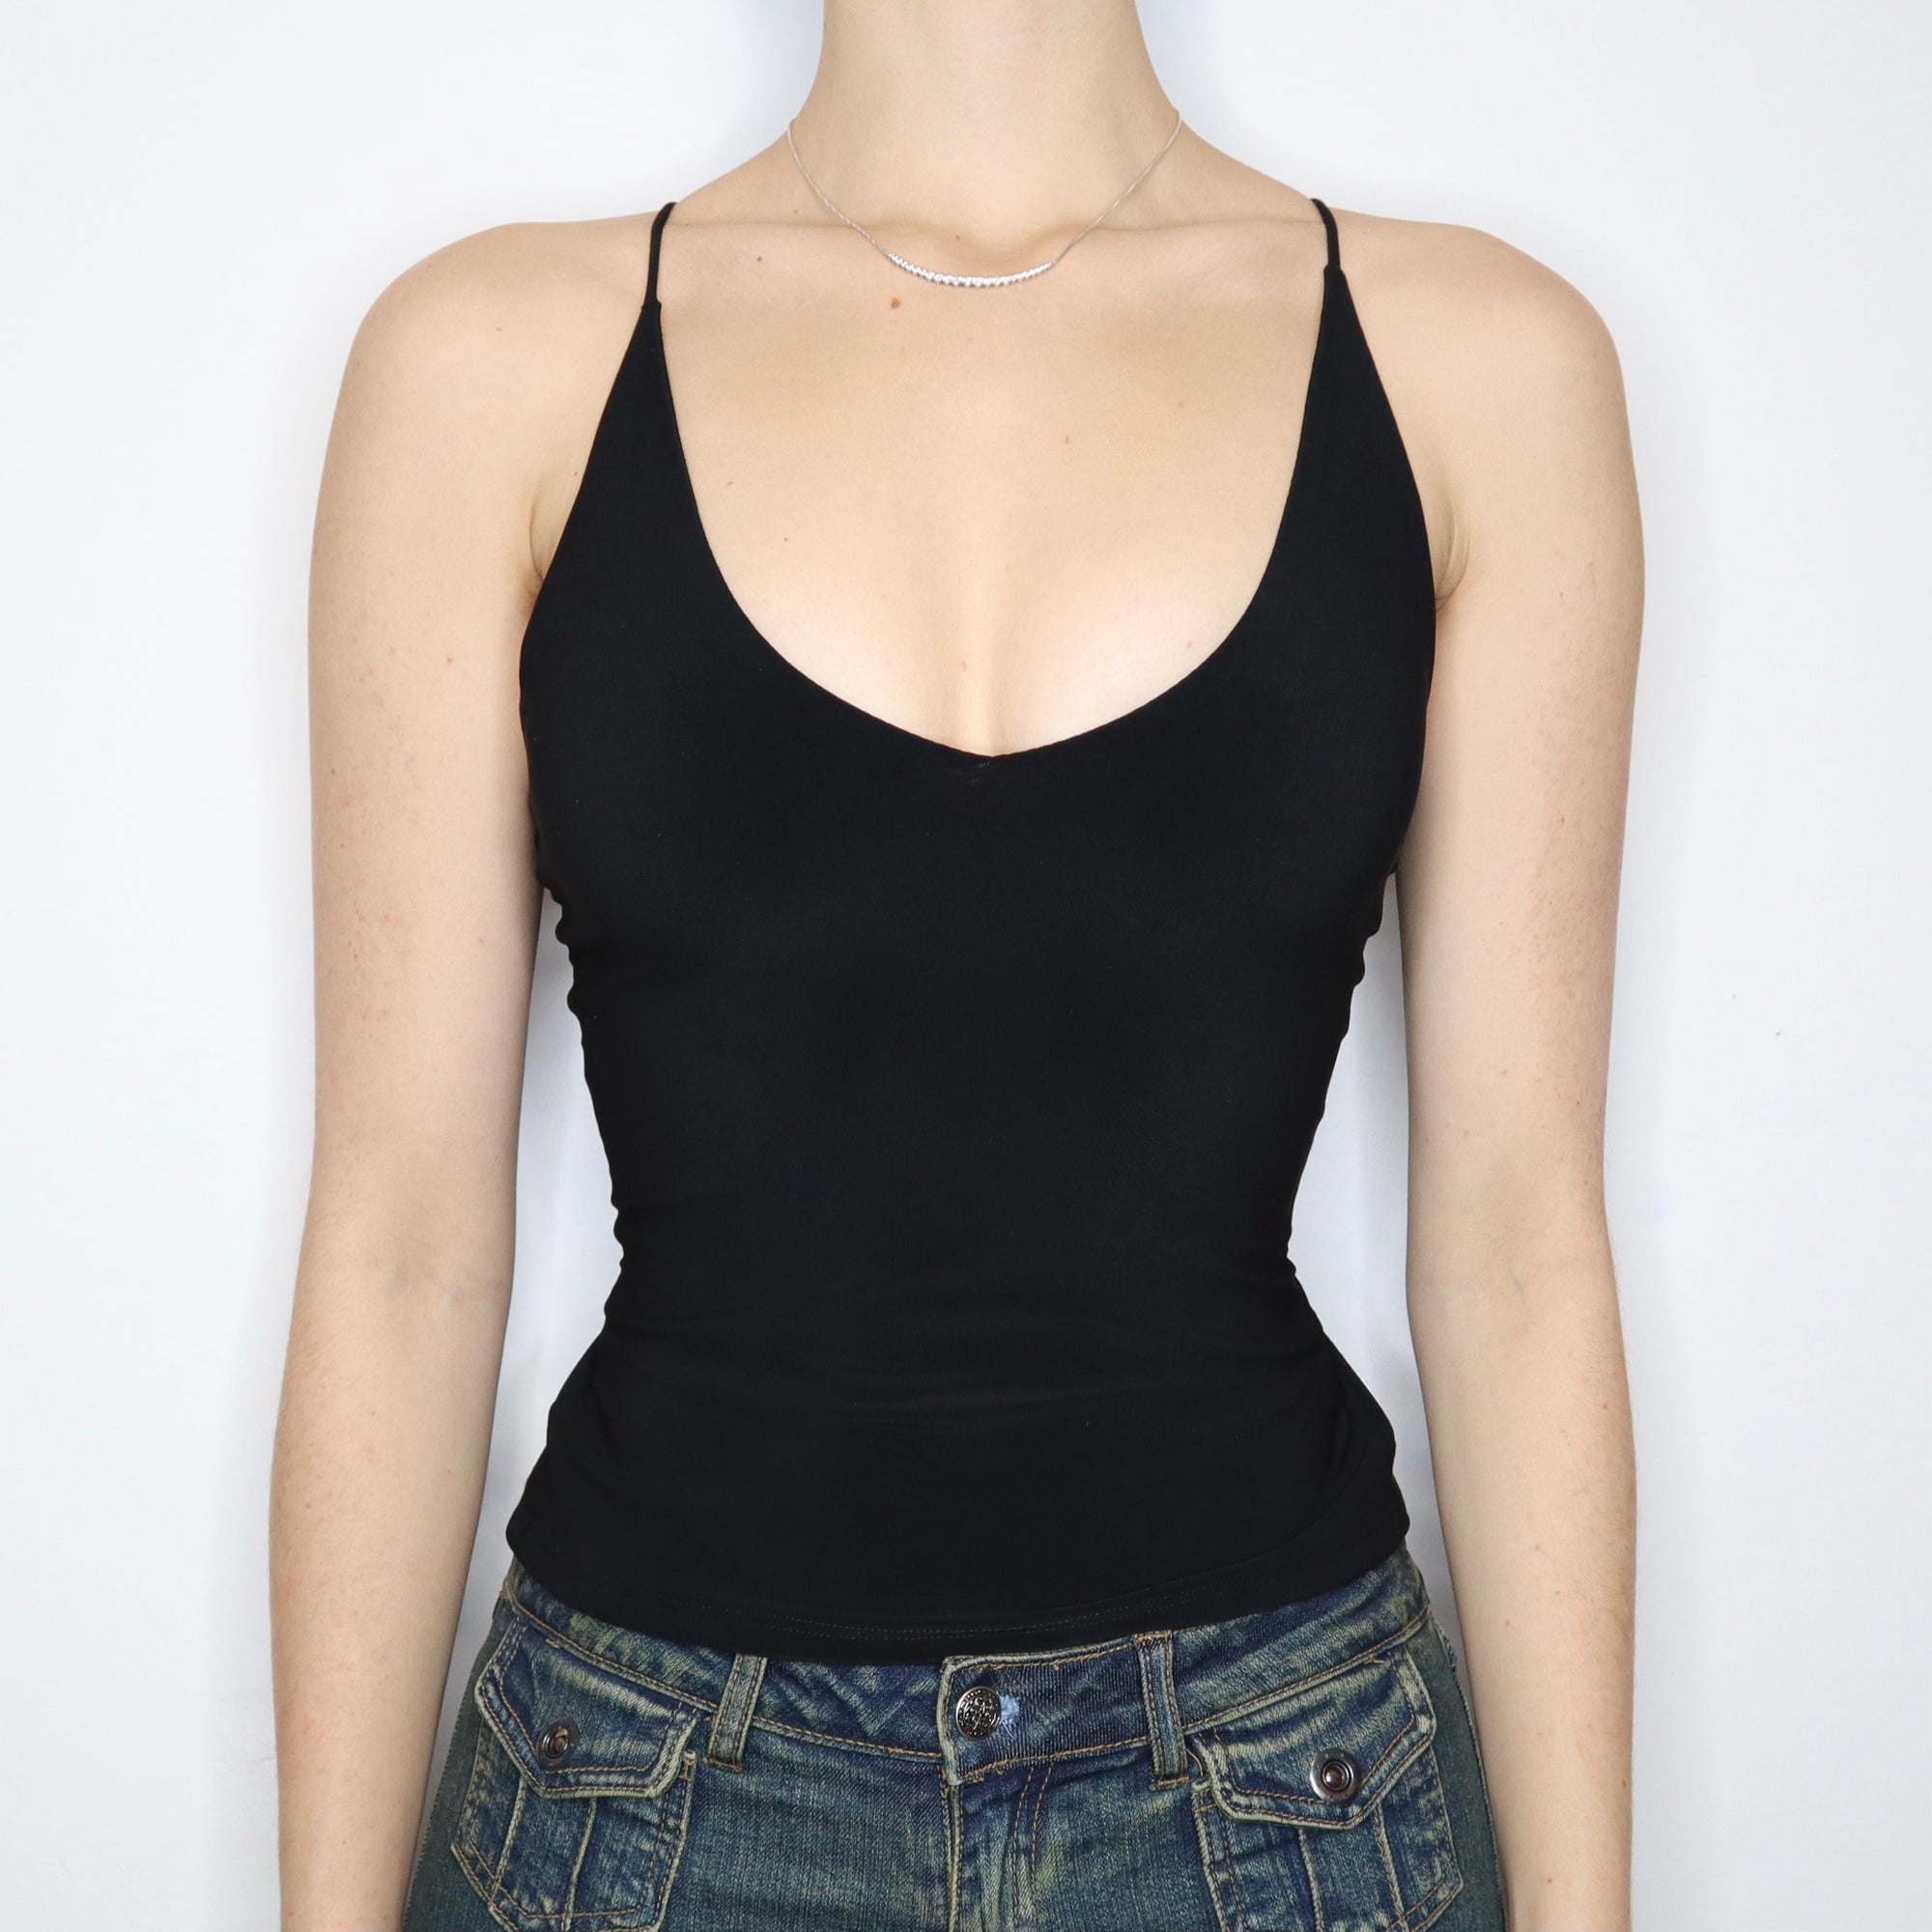 Vintage Early 2000s Black Backless Cami